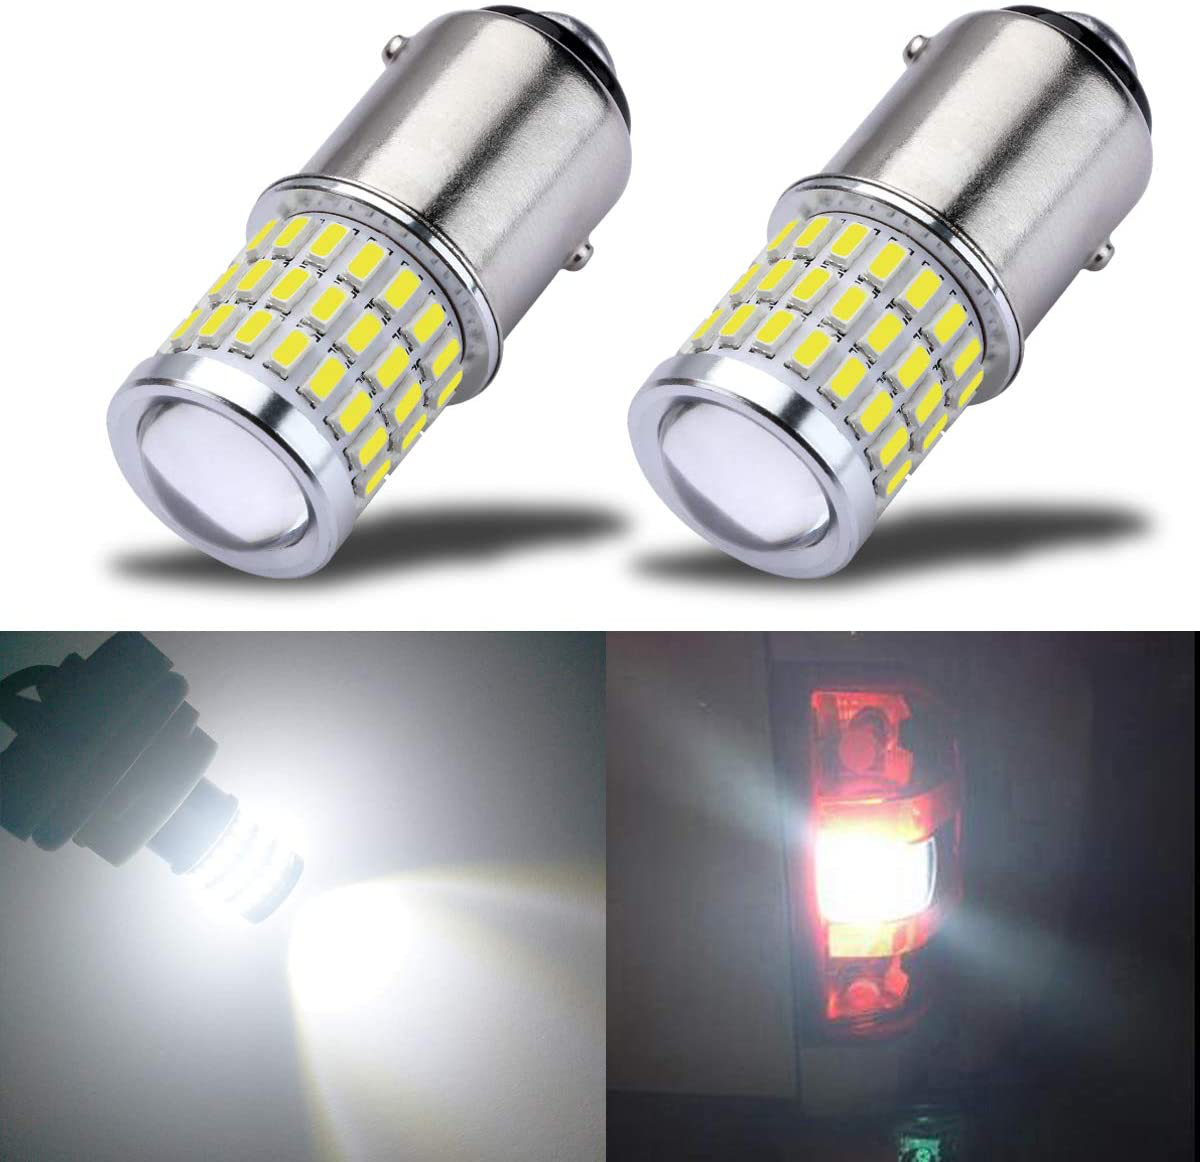 iBrightstar Newest 9-30V Super Bright Low Power 1157 2057 2357 7528 BAY15D LED Bulbs with Projector replacement for Turn Signal Lights and Brake Lights